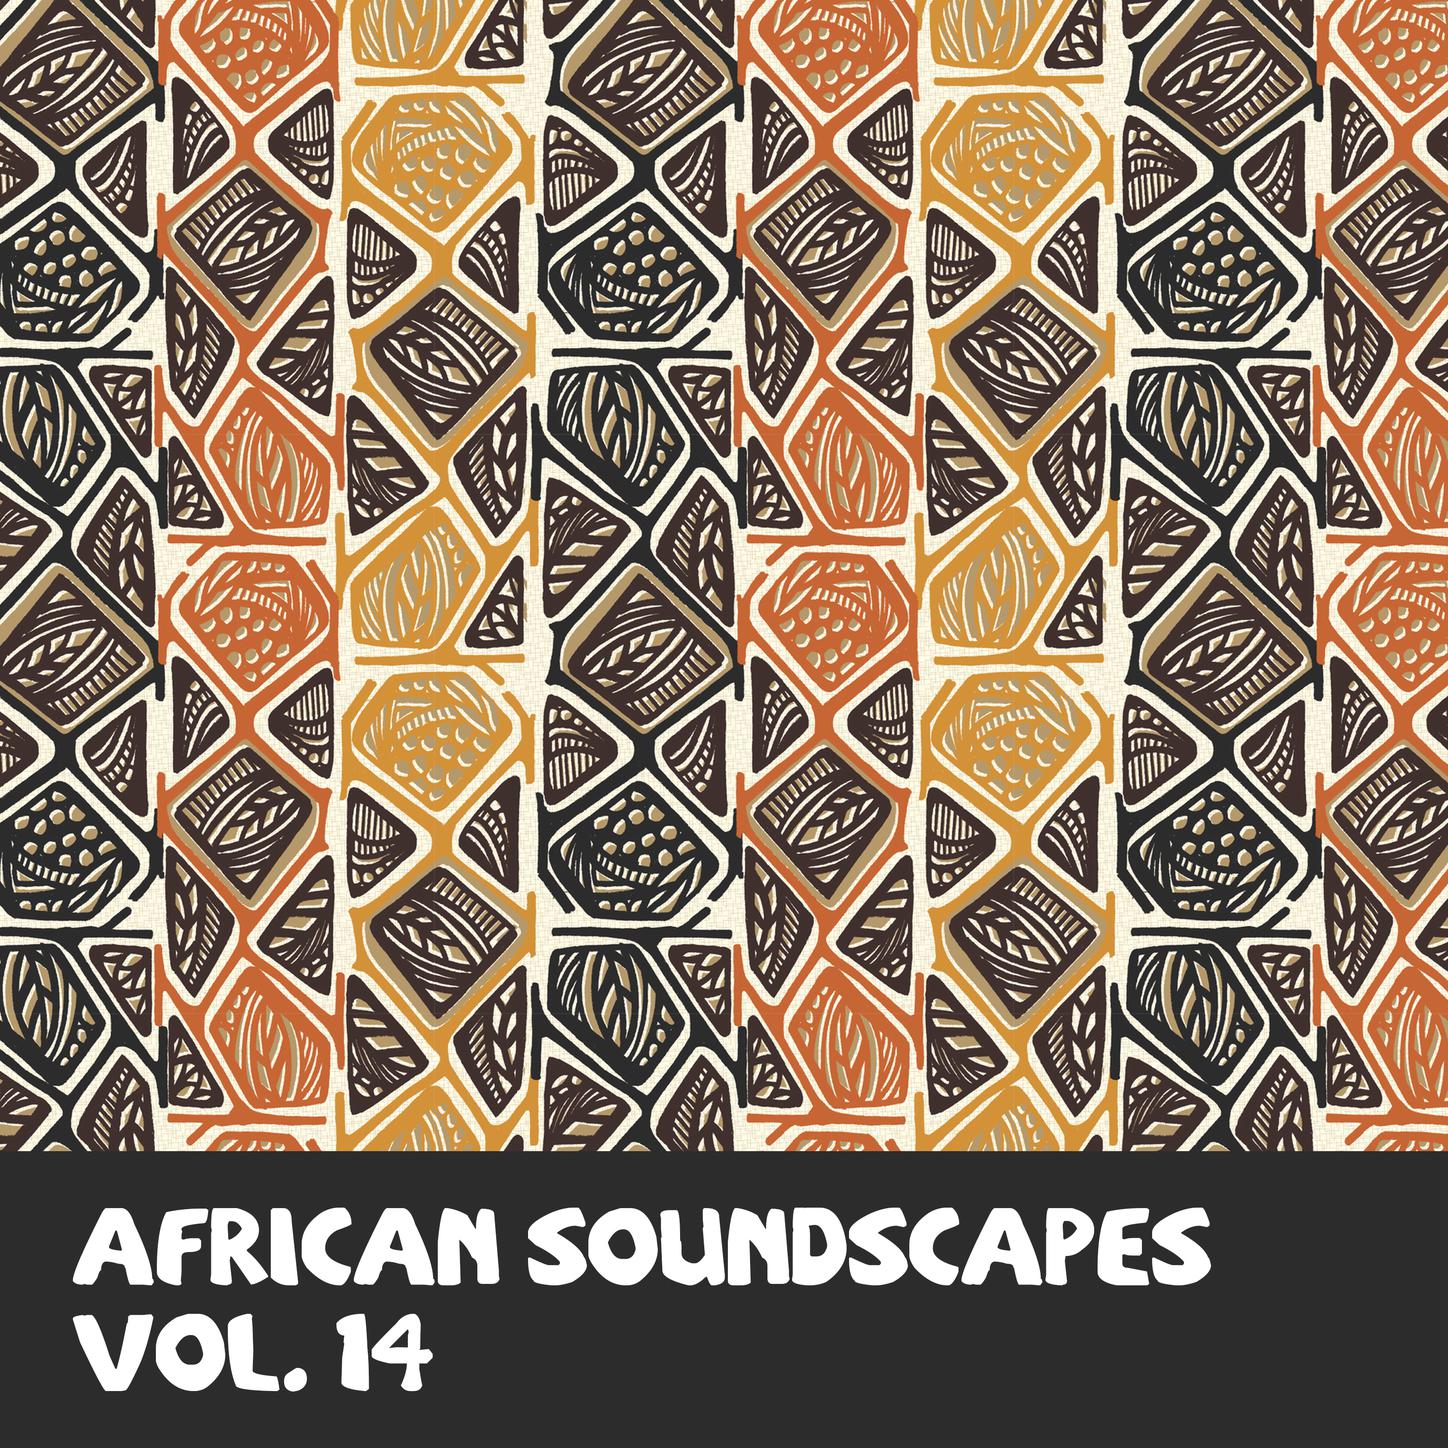 African Soundscapes Vol, 14